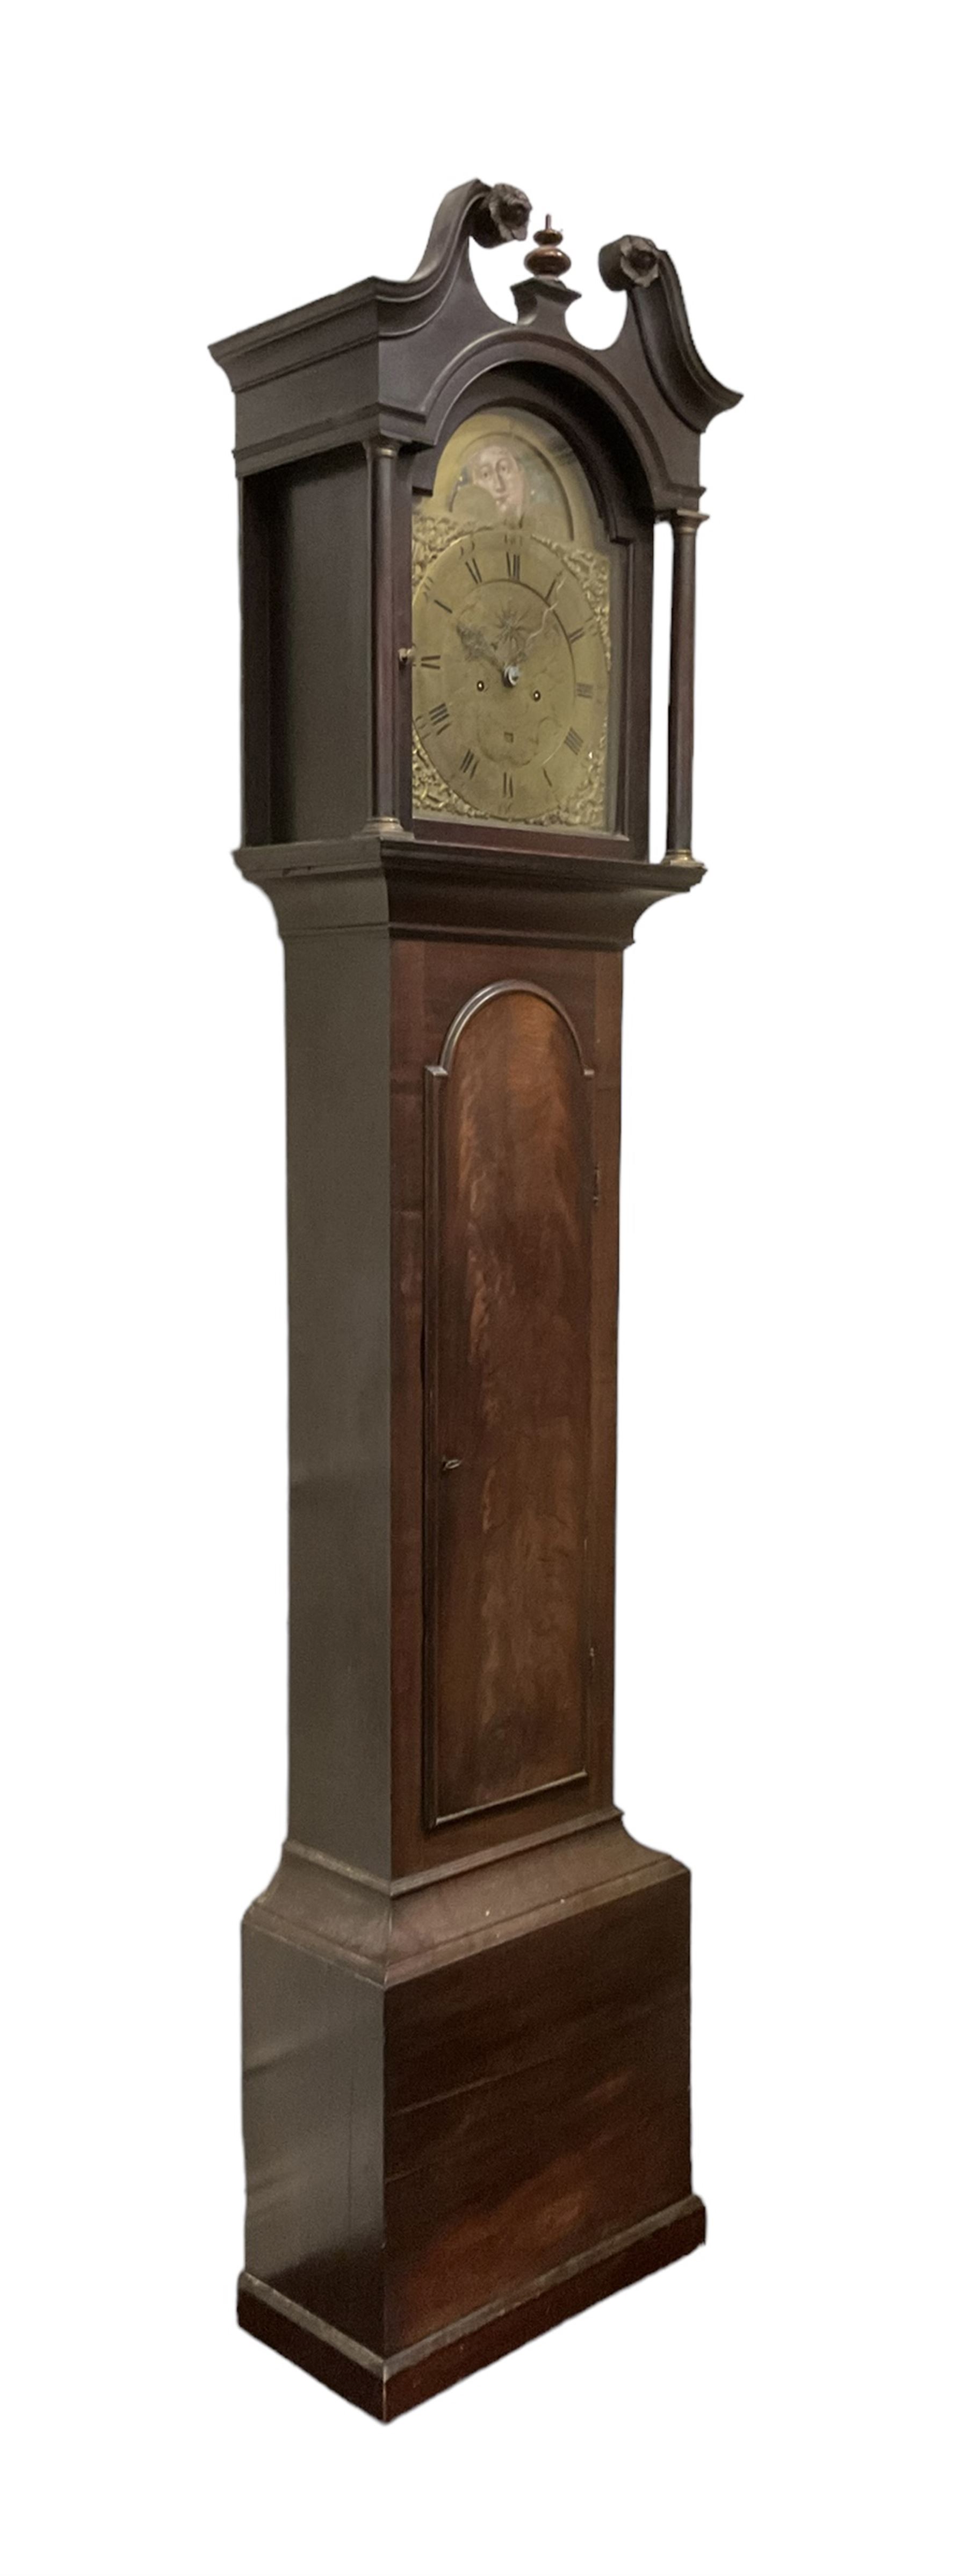 Joseph Wood of Scarborough - Late 18th century mahogany cased 8 day longcase clock c1780 with a swan